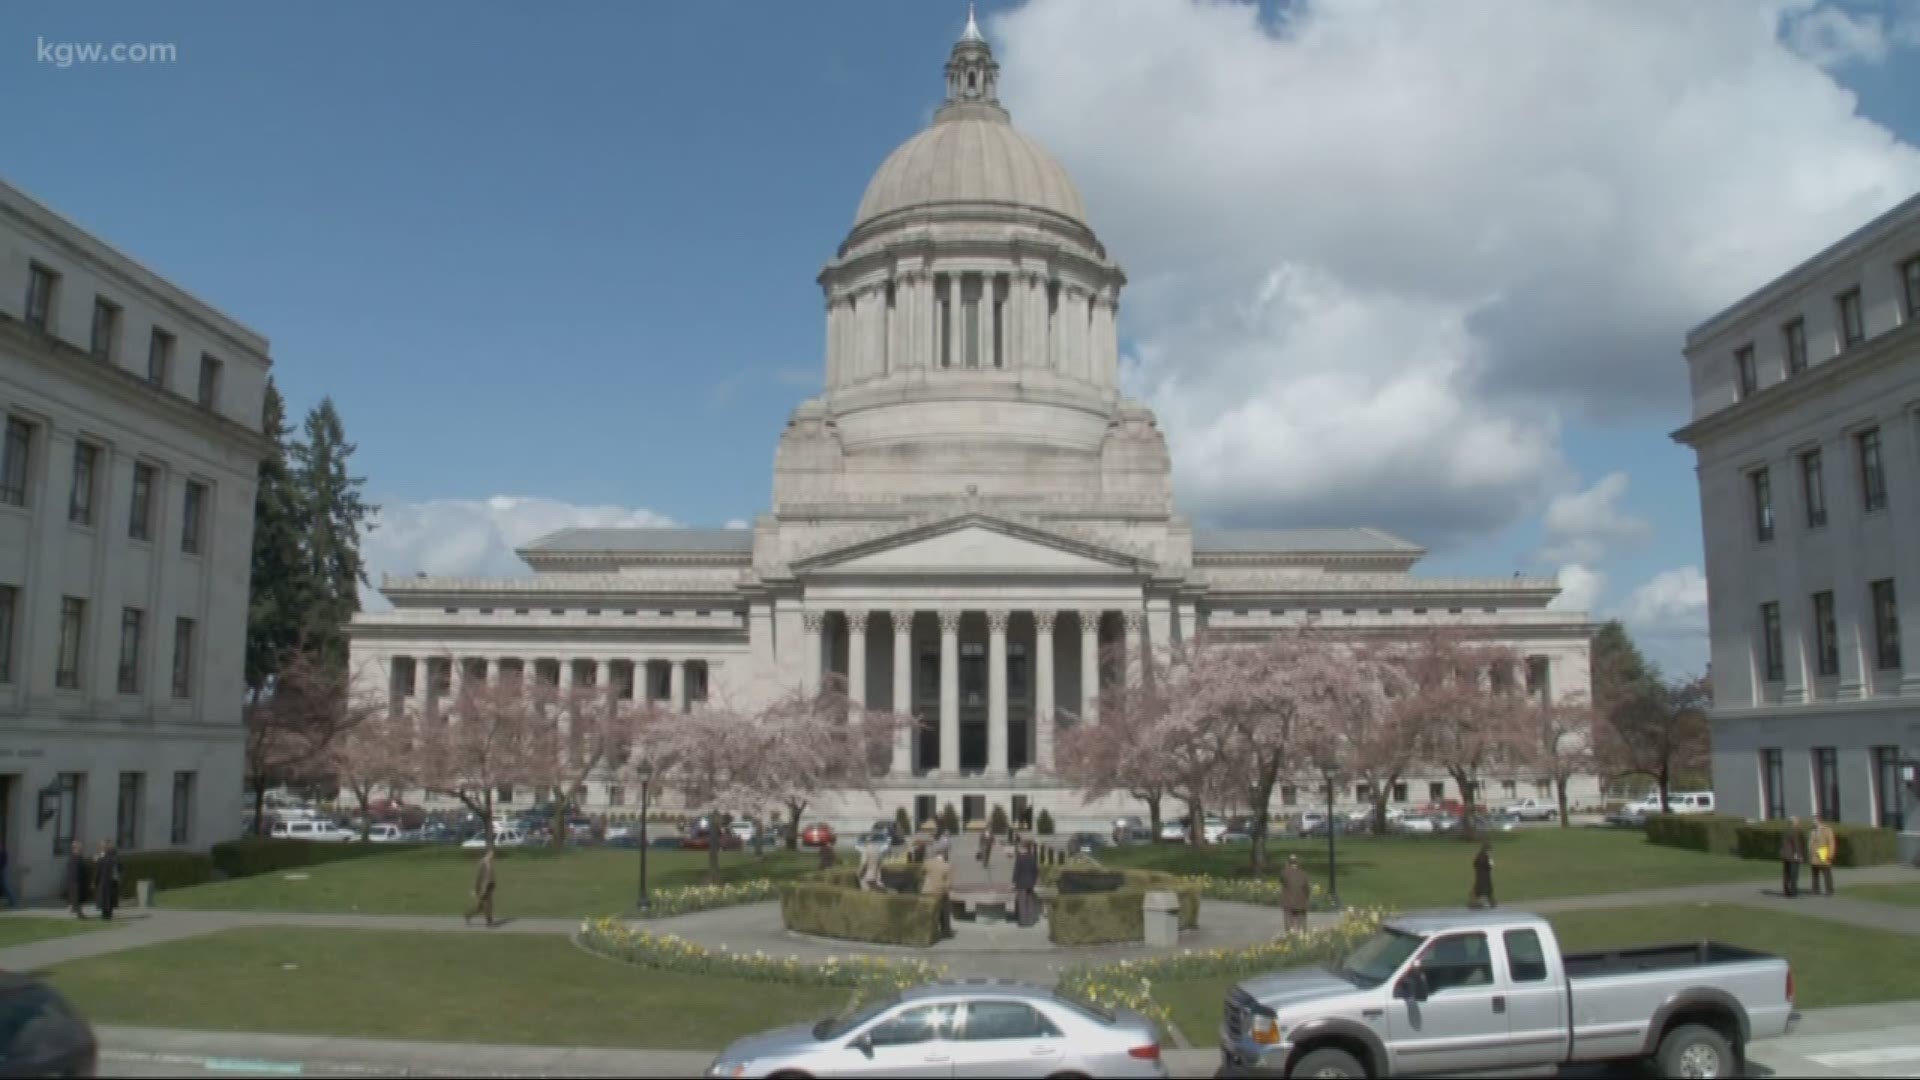 Bills in Oregon and Washington are focusing on vaccine exemptions.